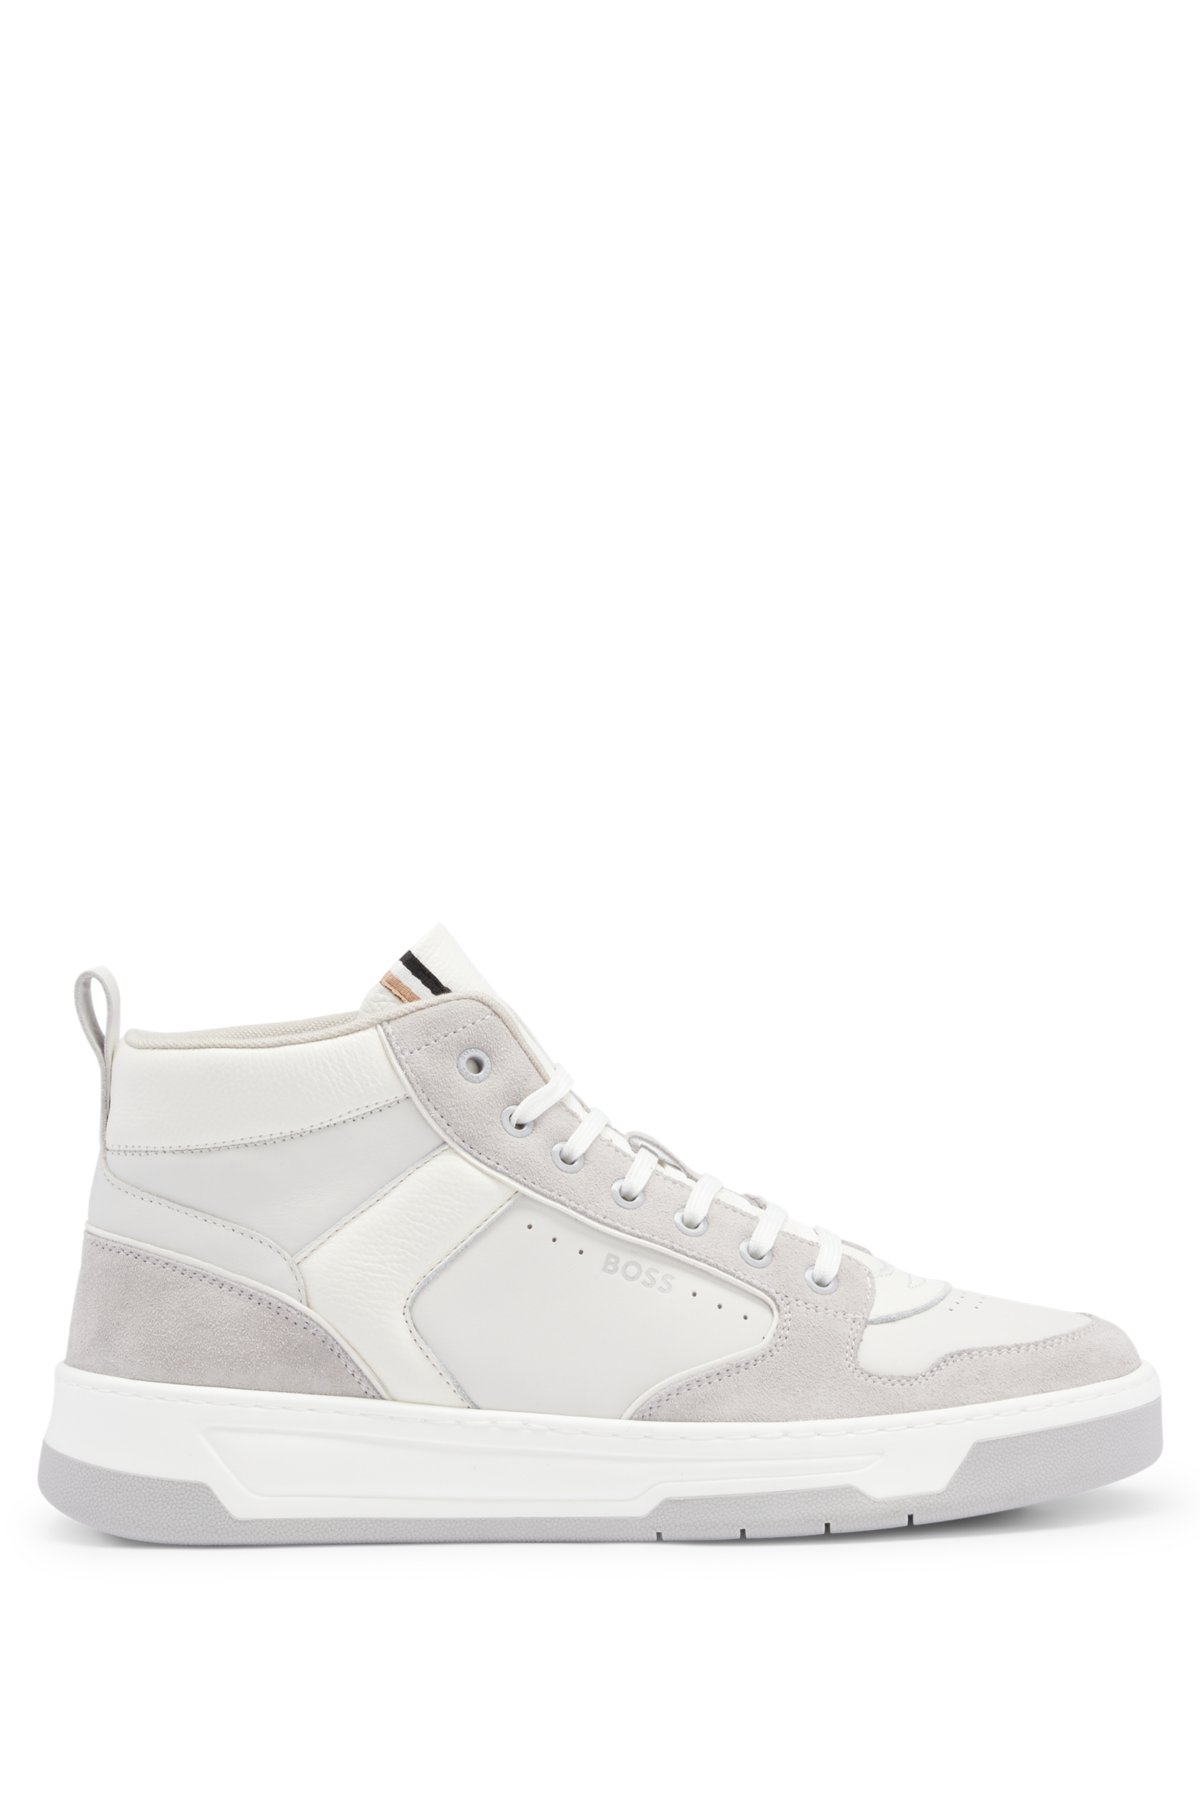 BOSS - High-top trainers in leather with logo details